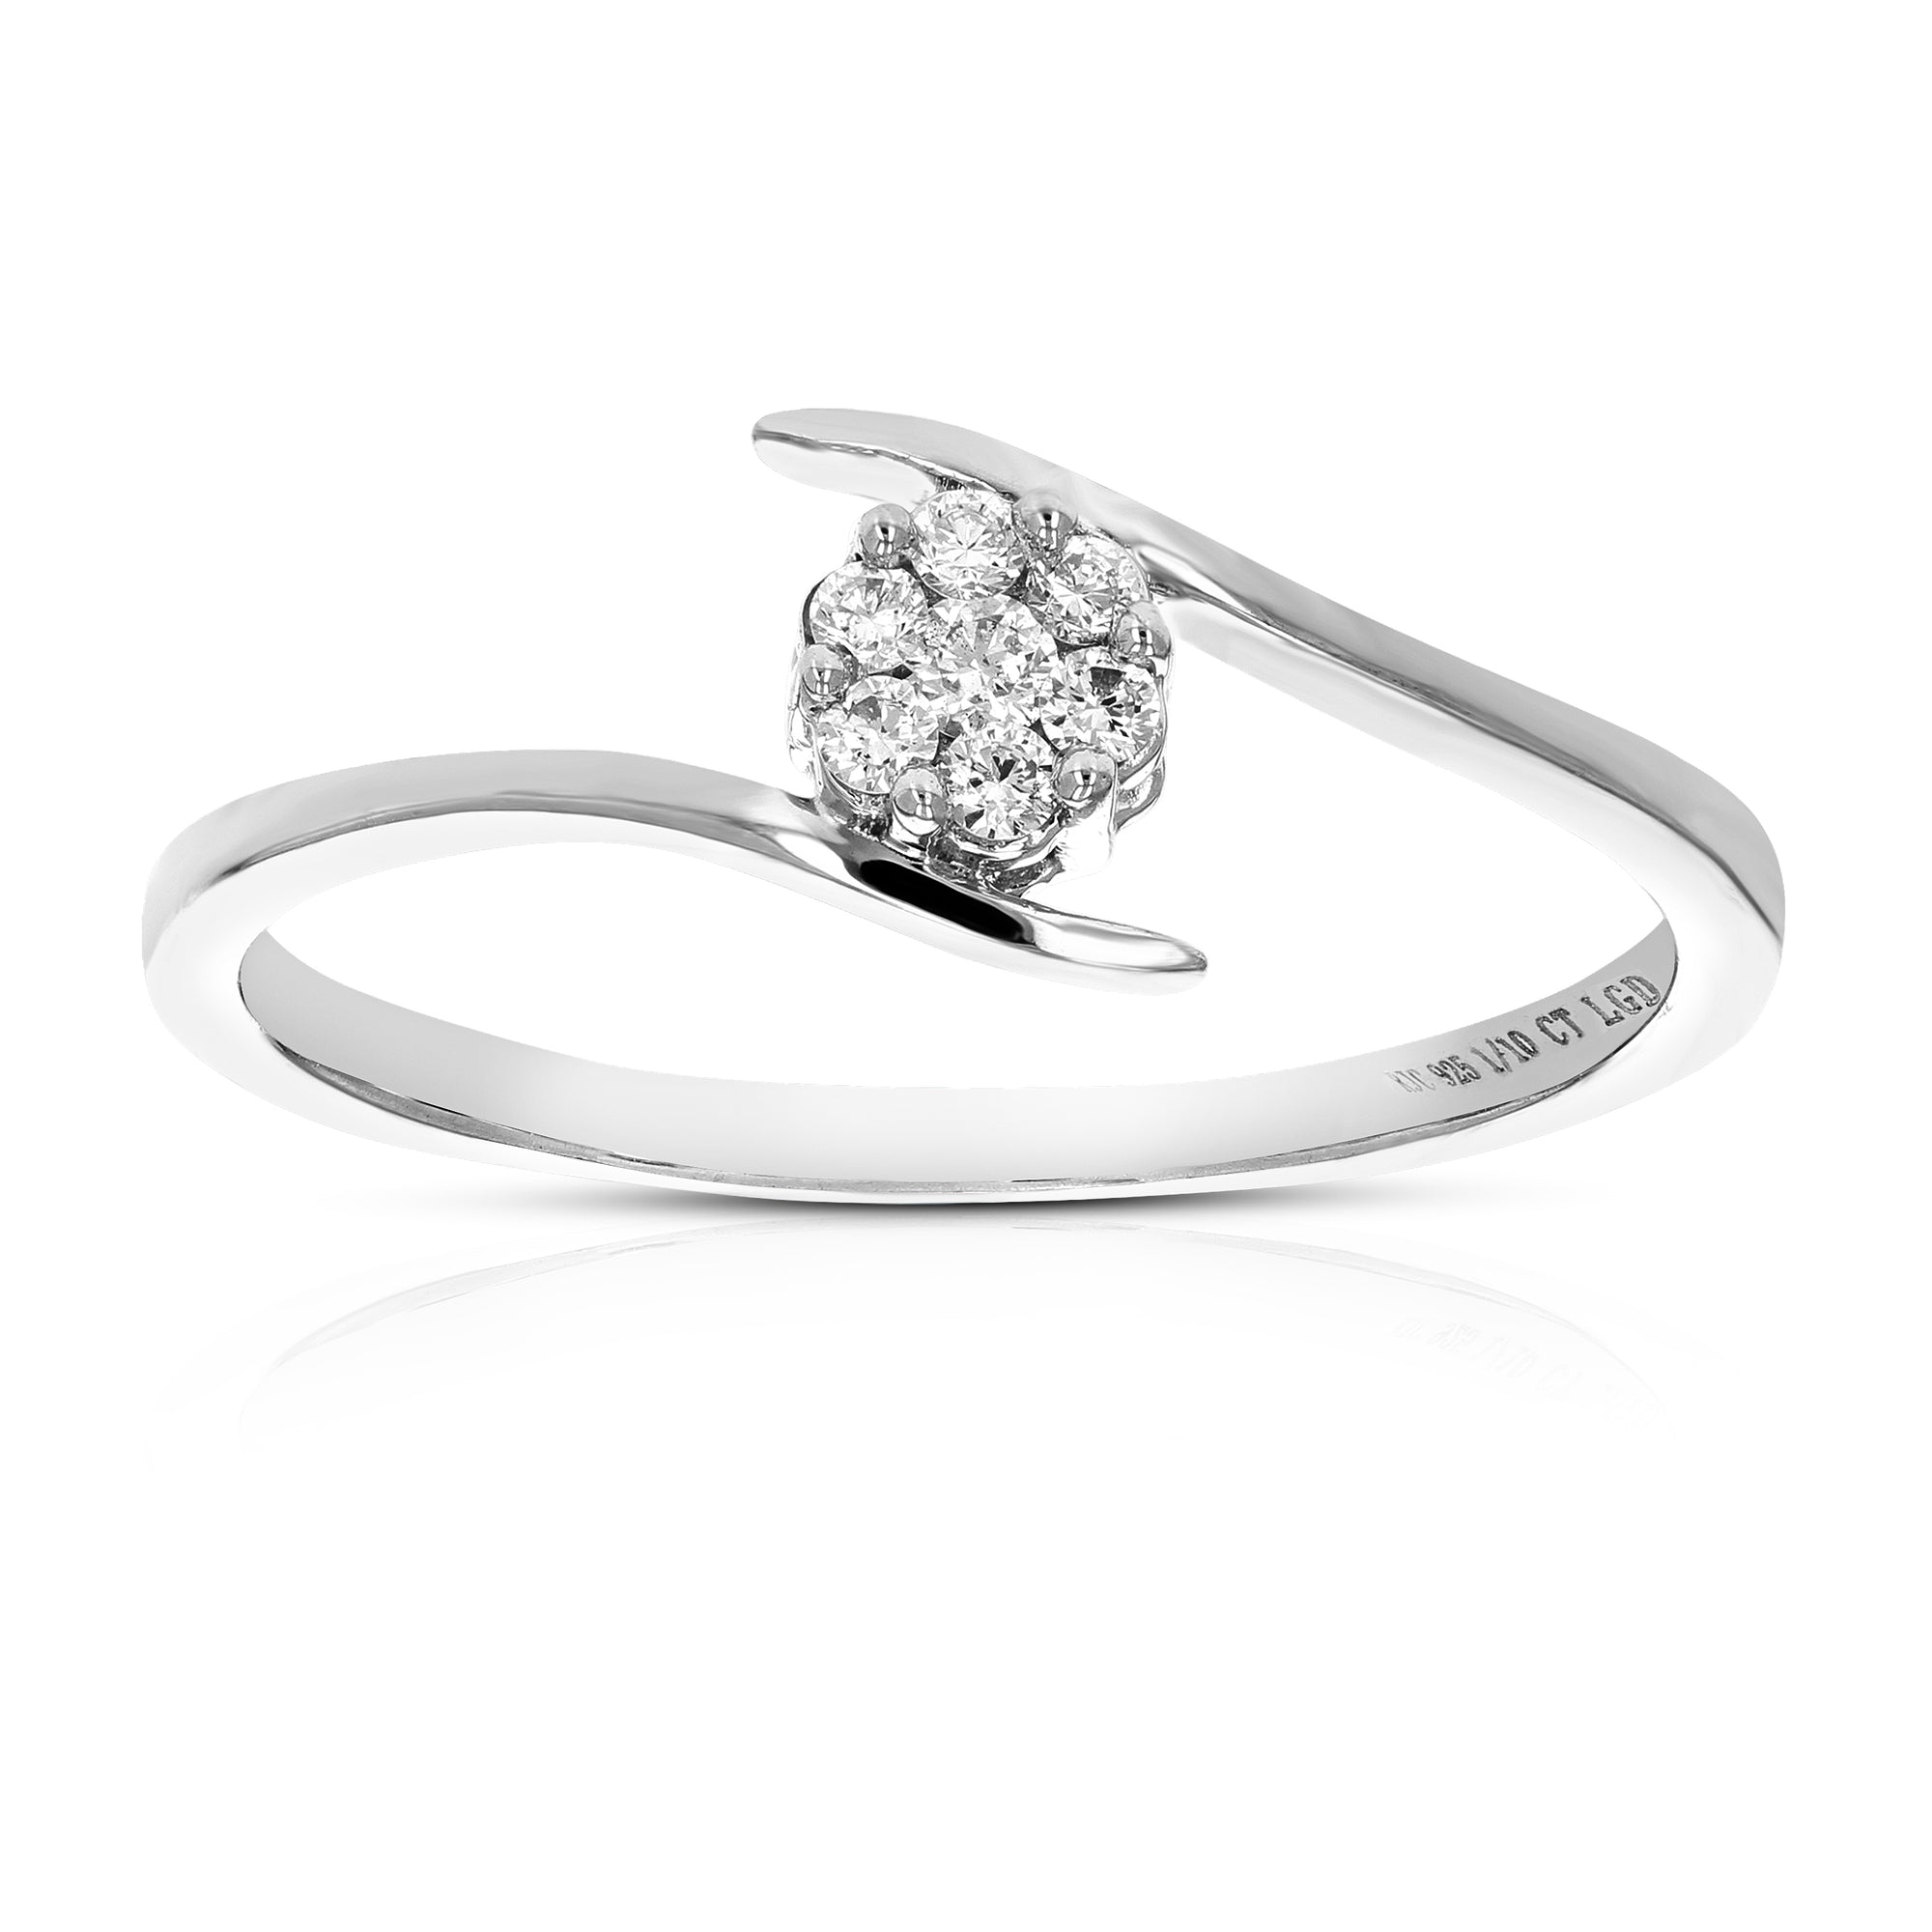 1/10 cttw Diamond Engagement Ring for Women, Round Lab Grown Diamond Engagement Ring in .925 Sterling Silver, Prong Setting